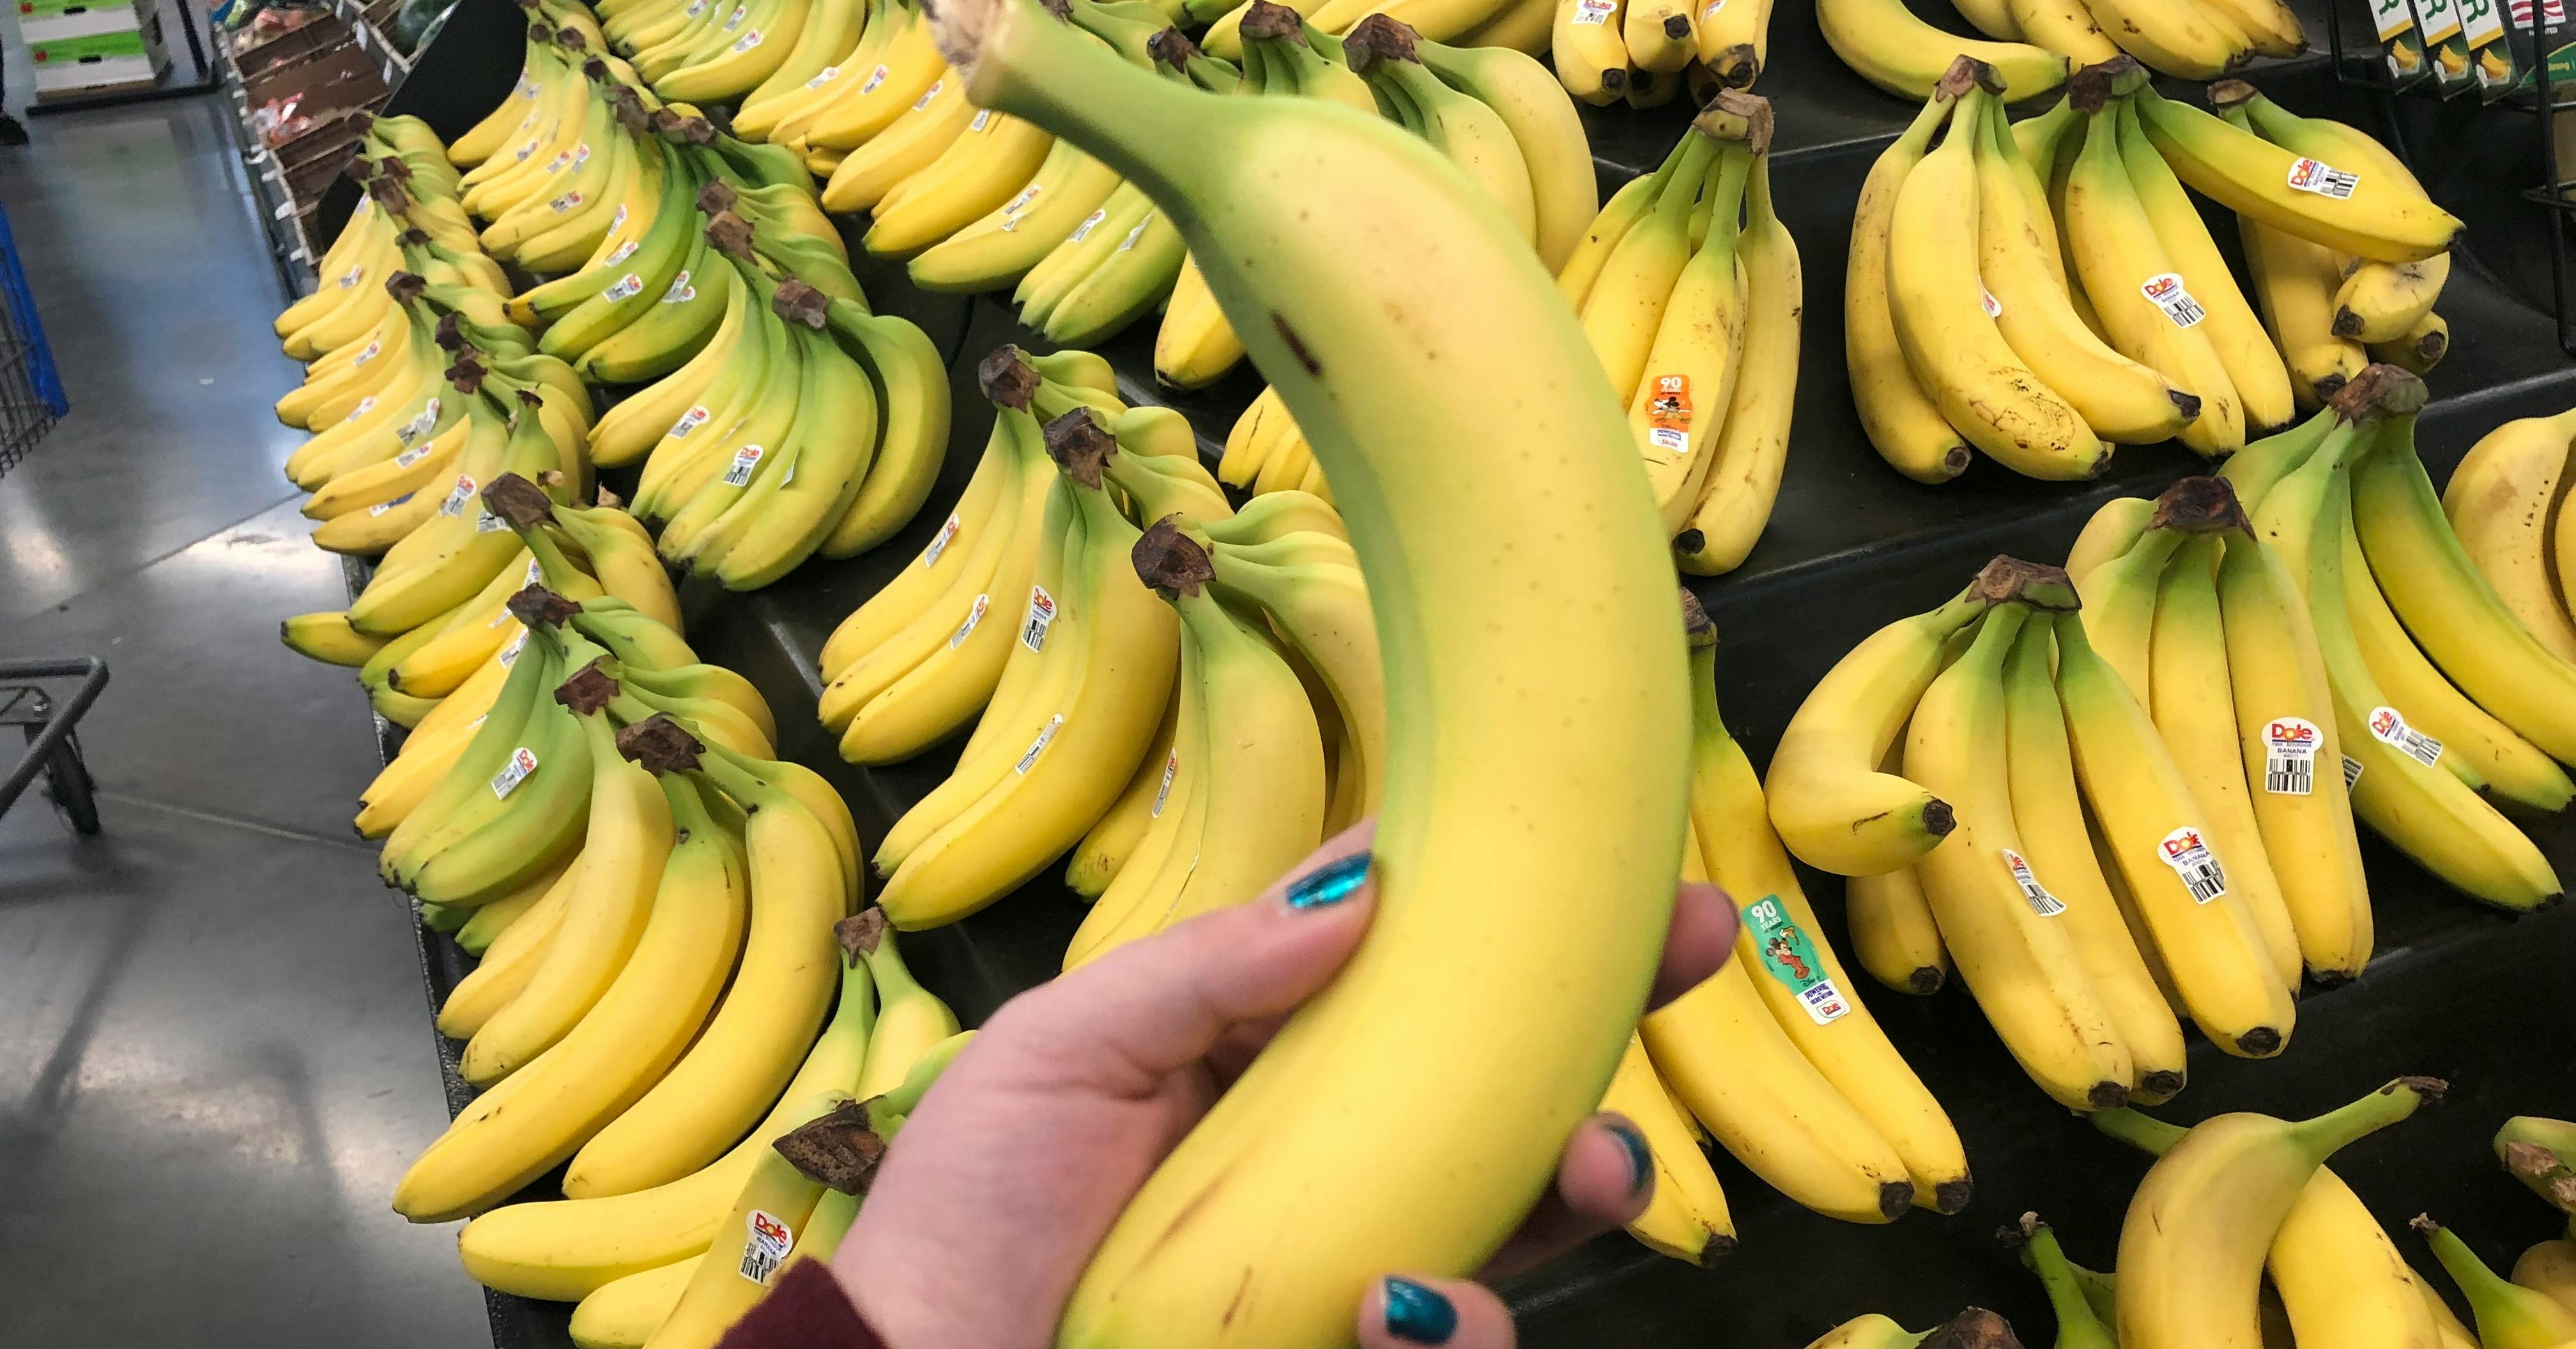 3 Free Pounds of Bananas at Walmart! - The Krazy Coupon Lady